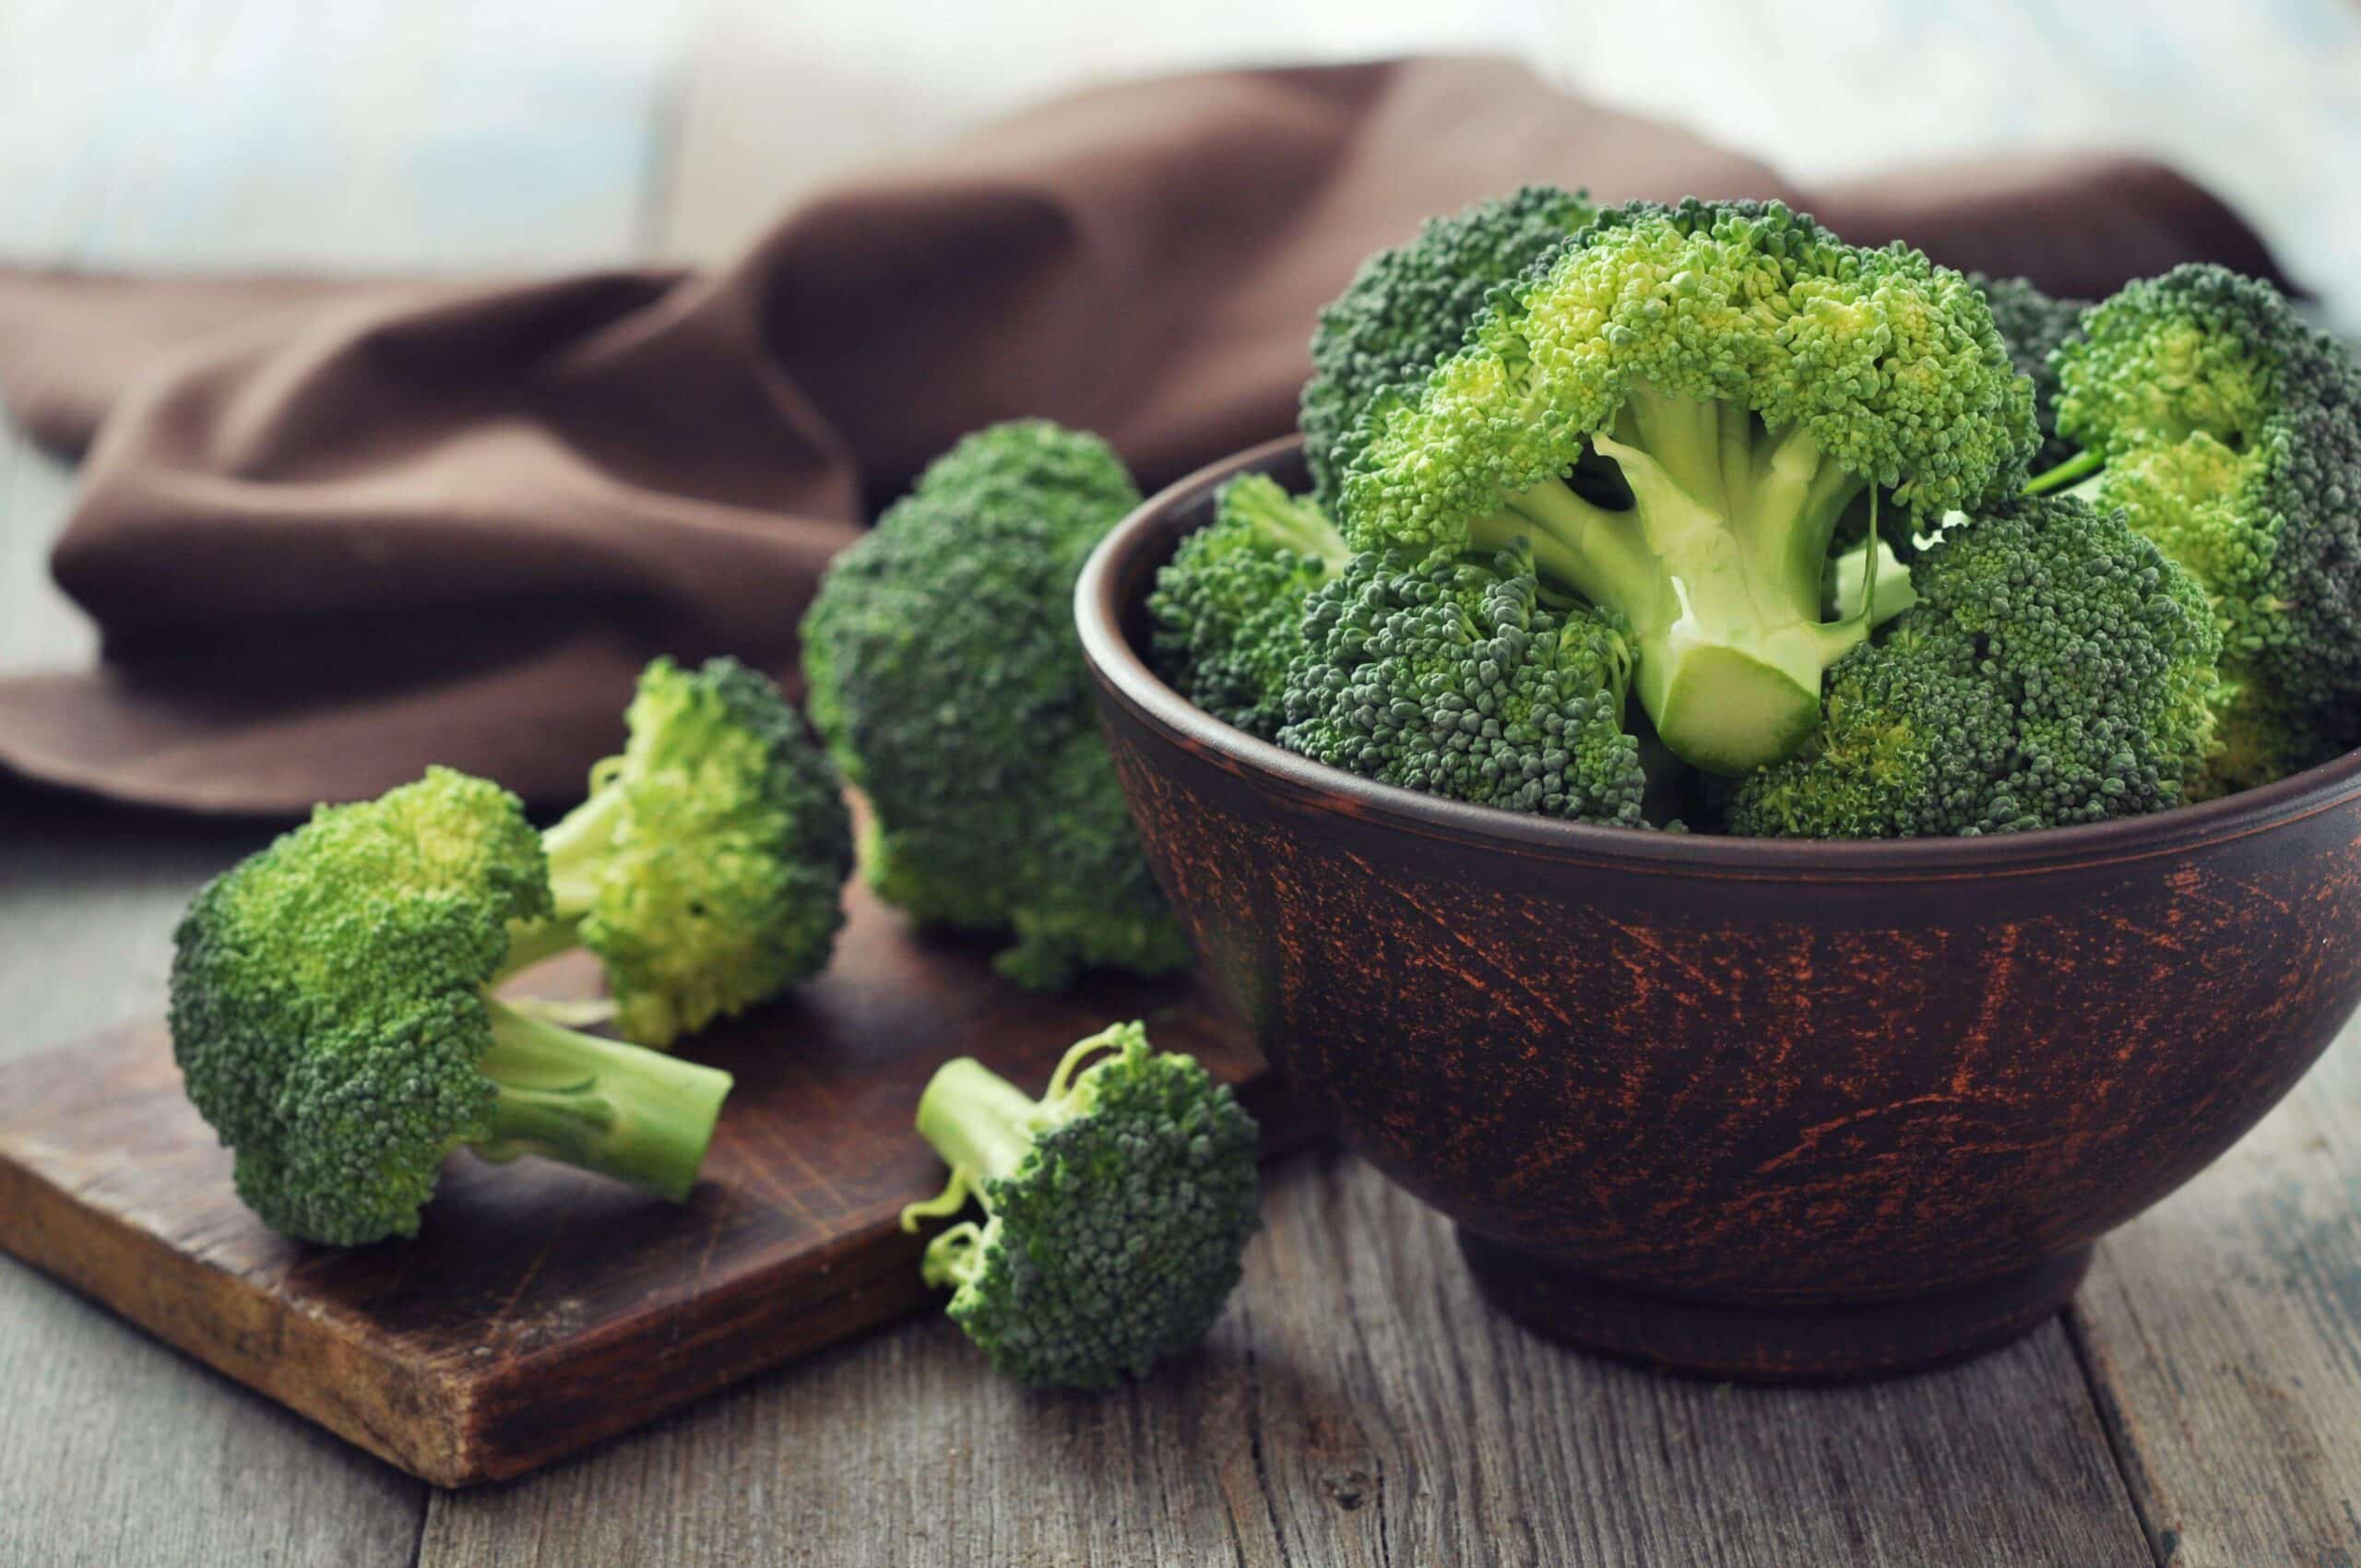 Broccoli - Benefits, Nutrition, Side Effects & Recipes - HealthifyMe